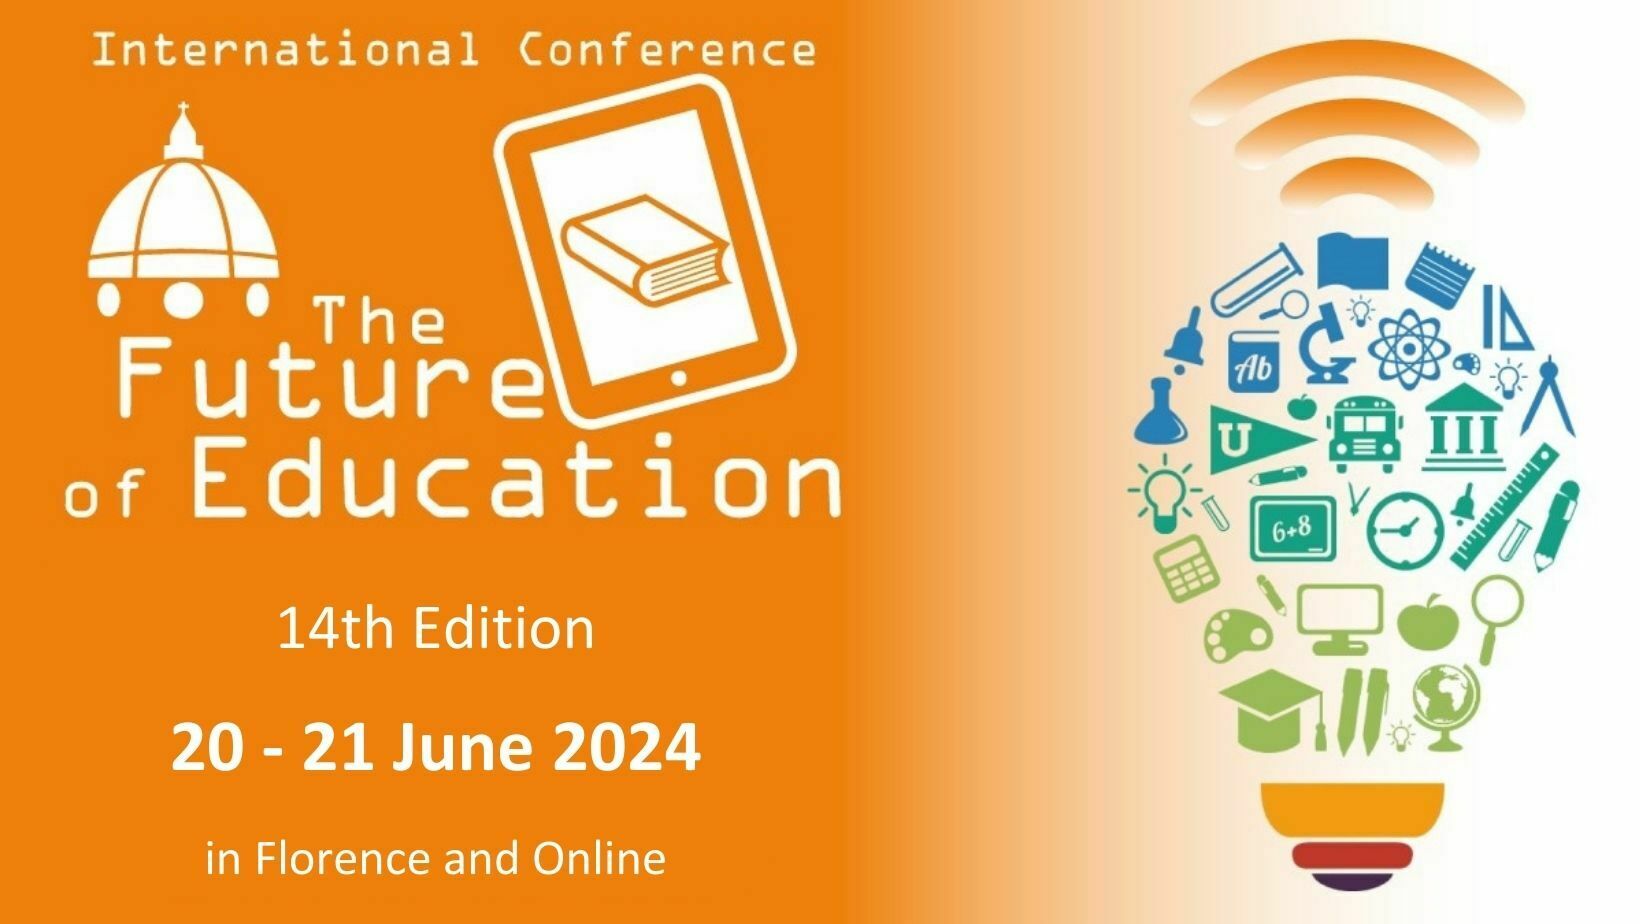 FOE 2024 | The Future of Education 14th Edition - International Conference, Florence, Tuscany, Italy